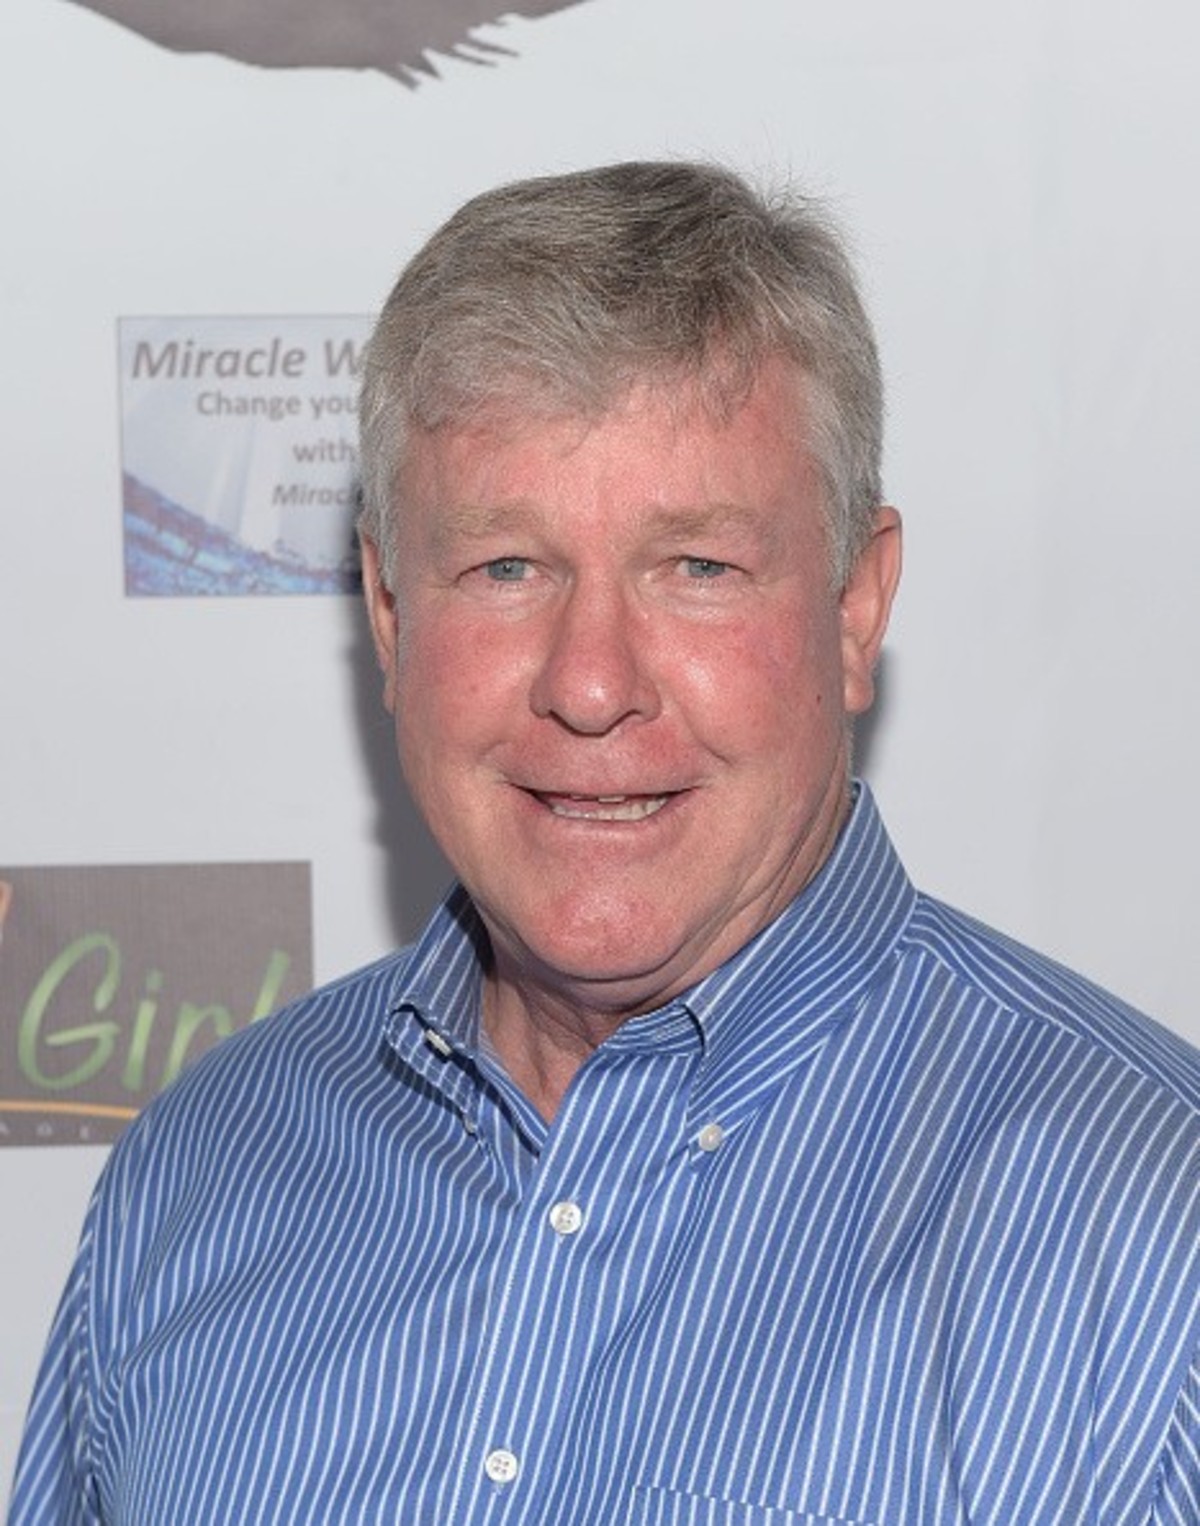 How tall is Larry Wilcox?